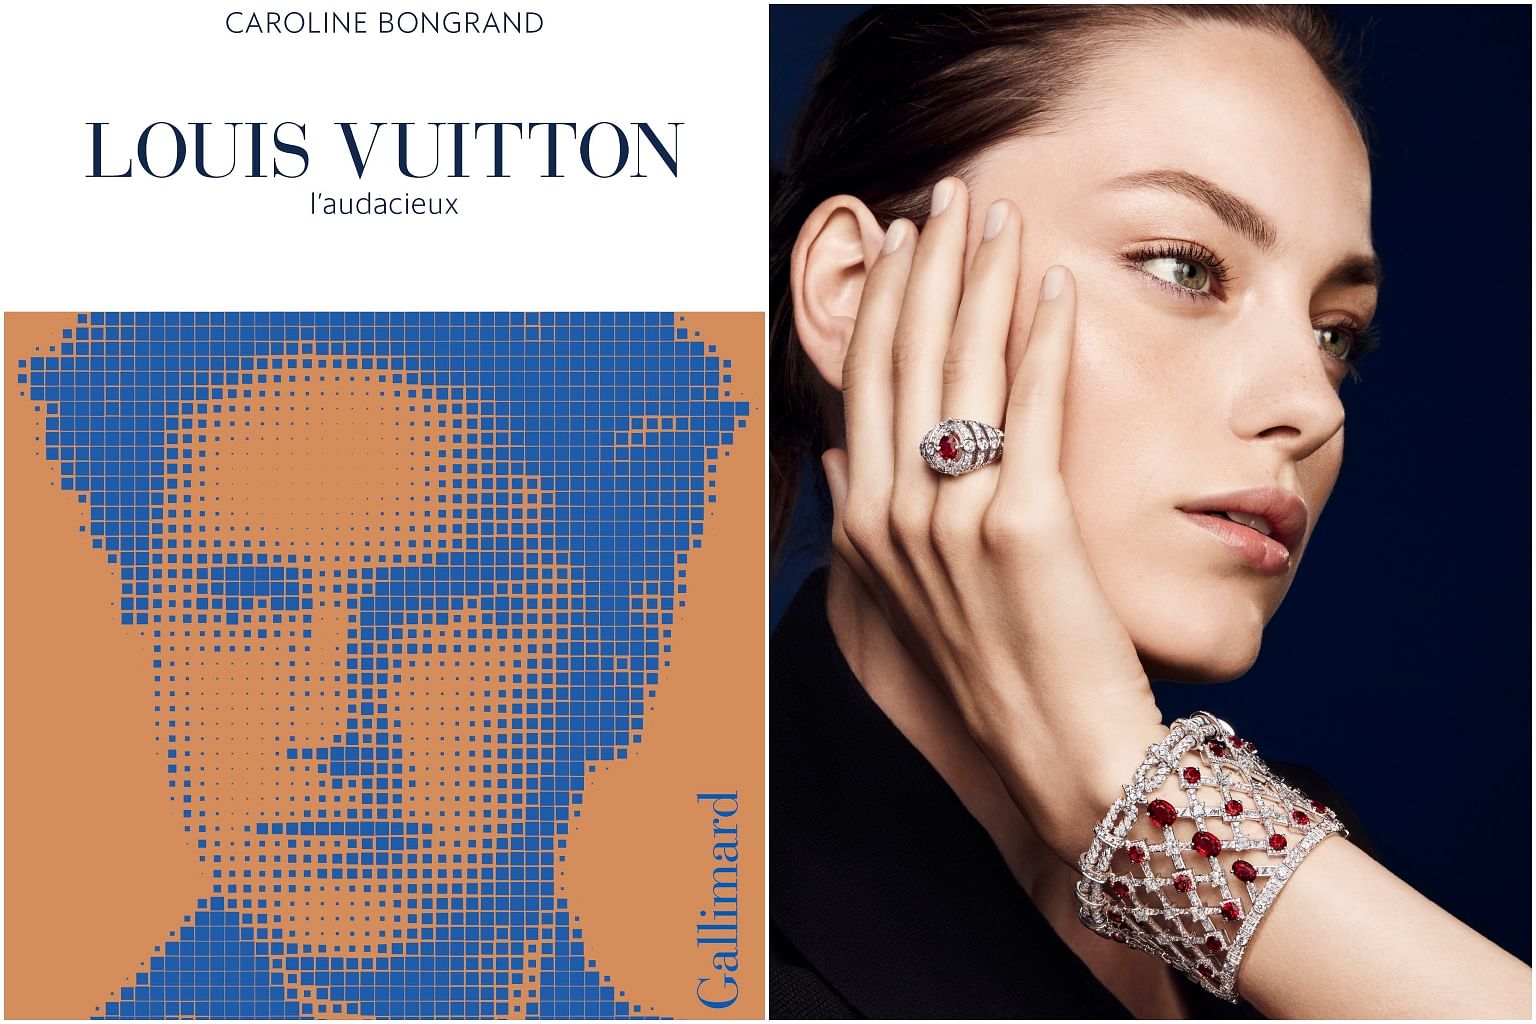 Celebrating the Life of Louis Vuitton 200 Years After His Birth - A&E  Magazine